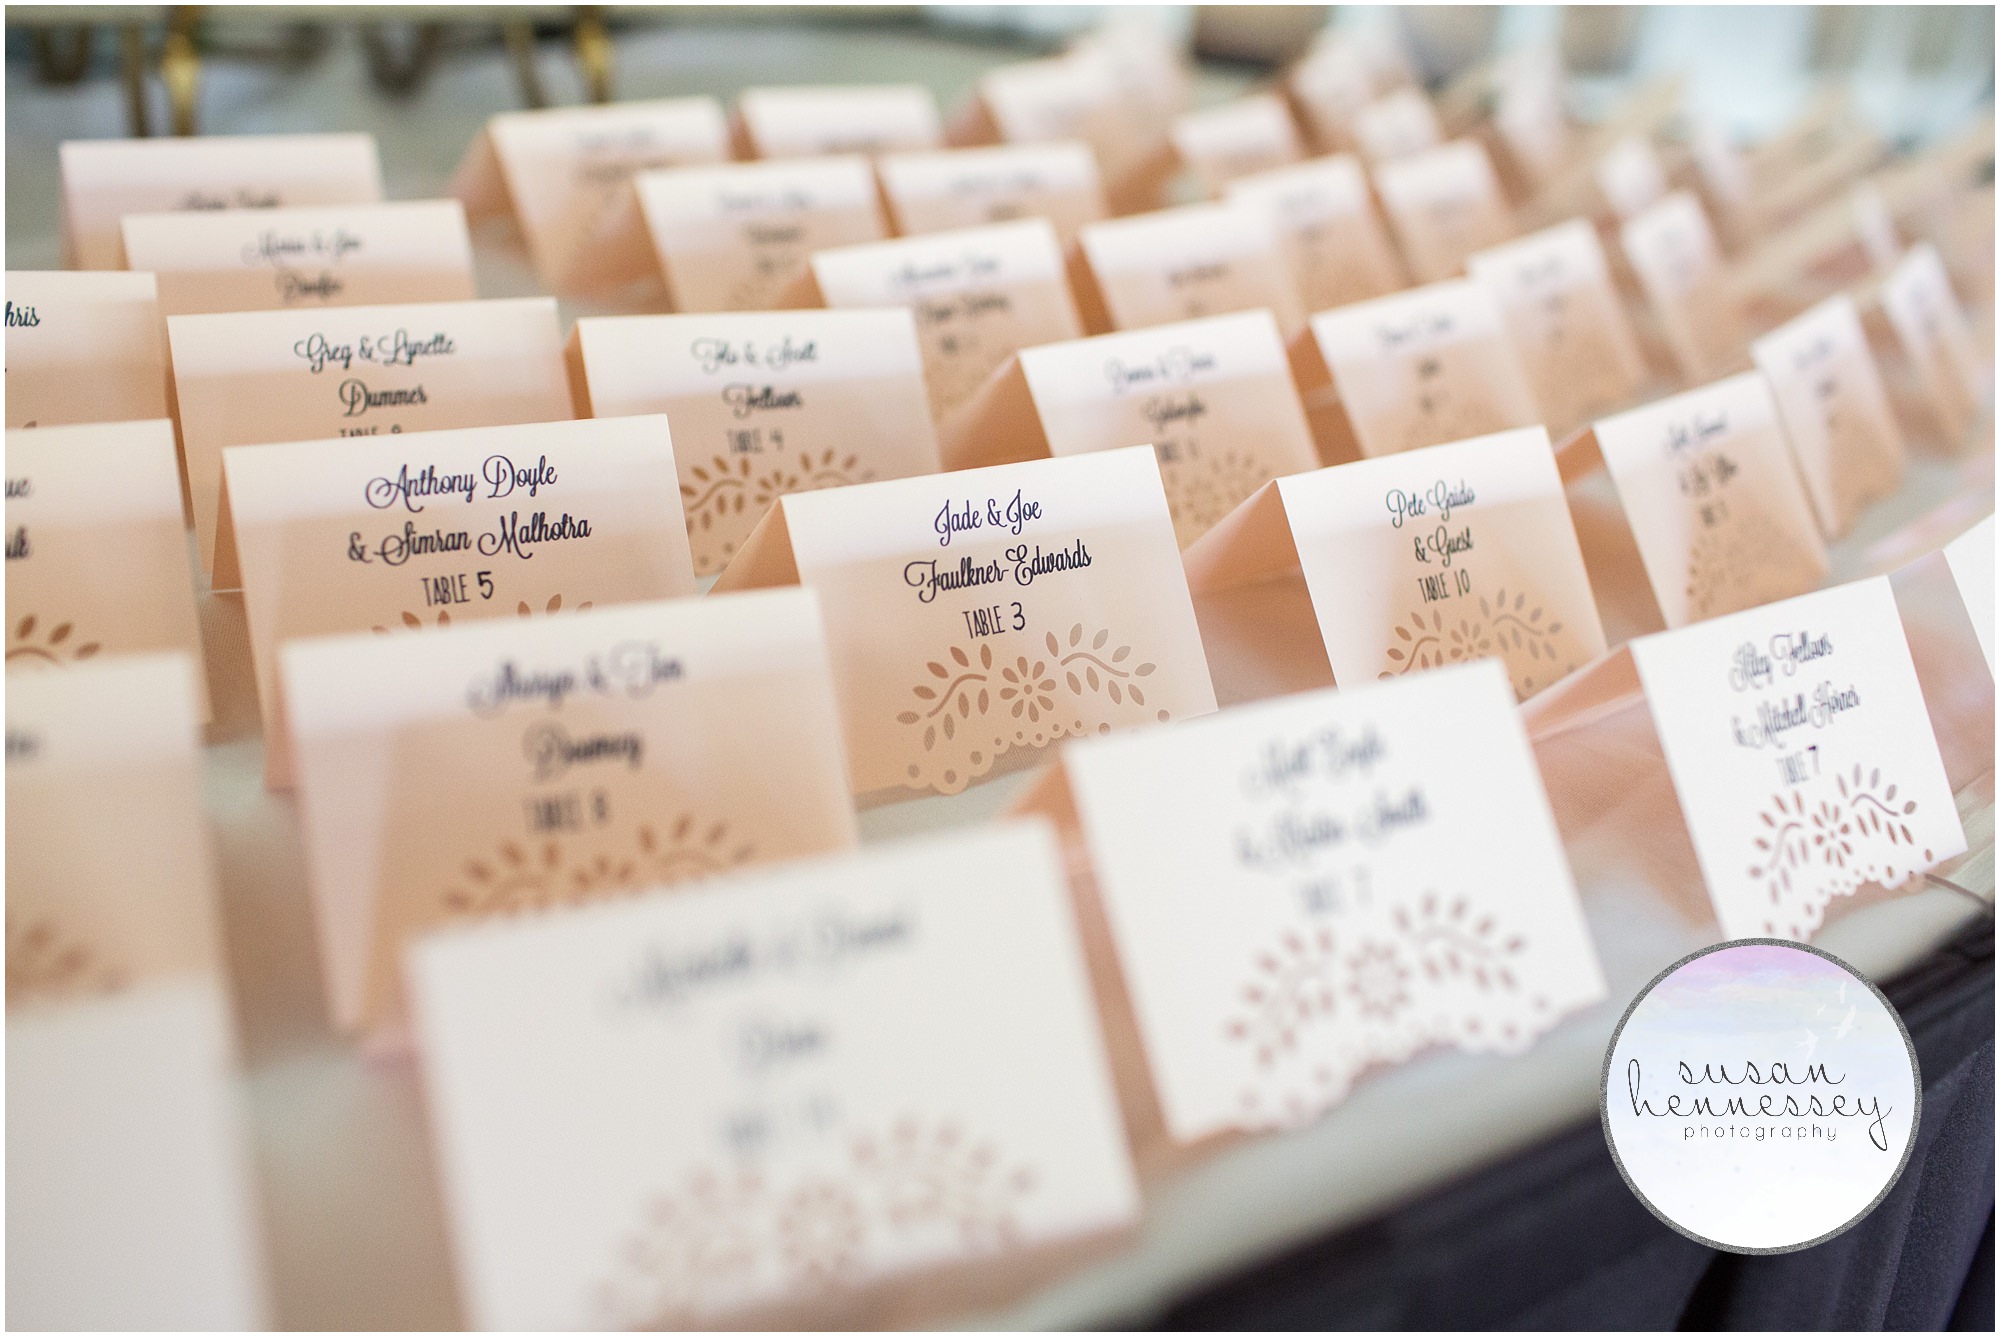 Escort cards at Old York Country Club wedding